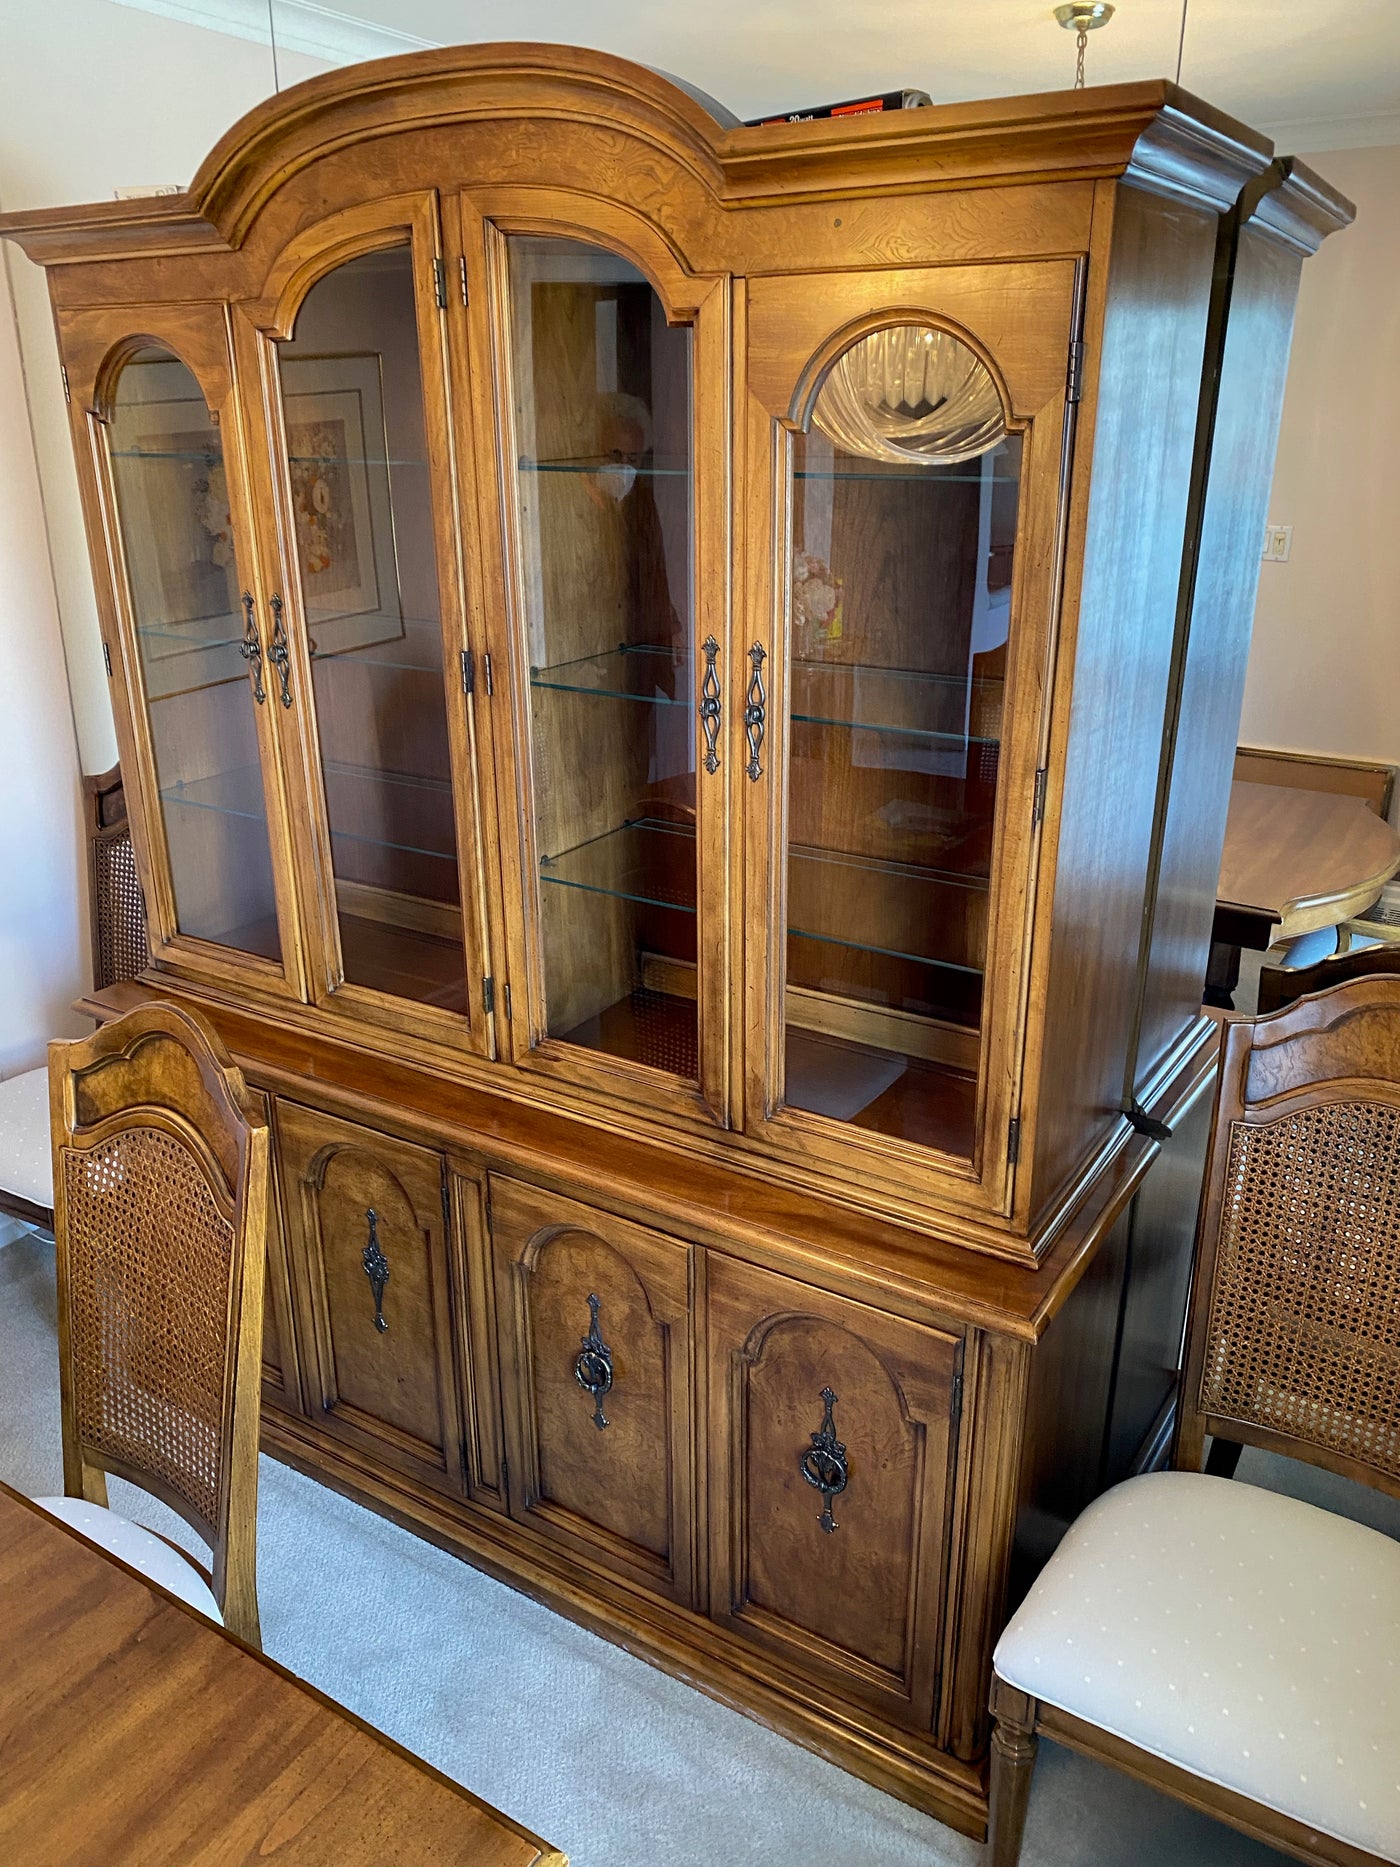 Huntley Furniture By Thomasville Solid Wood China Cabinet My Stuff Canada S Content And Estate Specialists